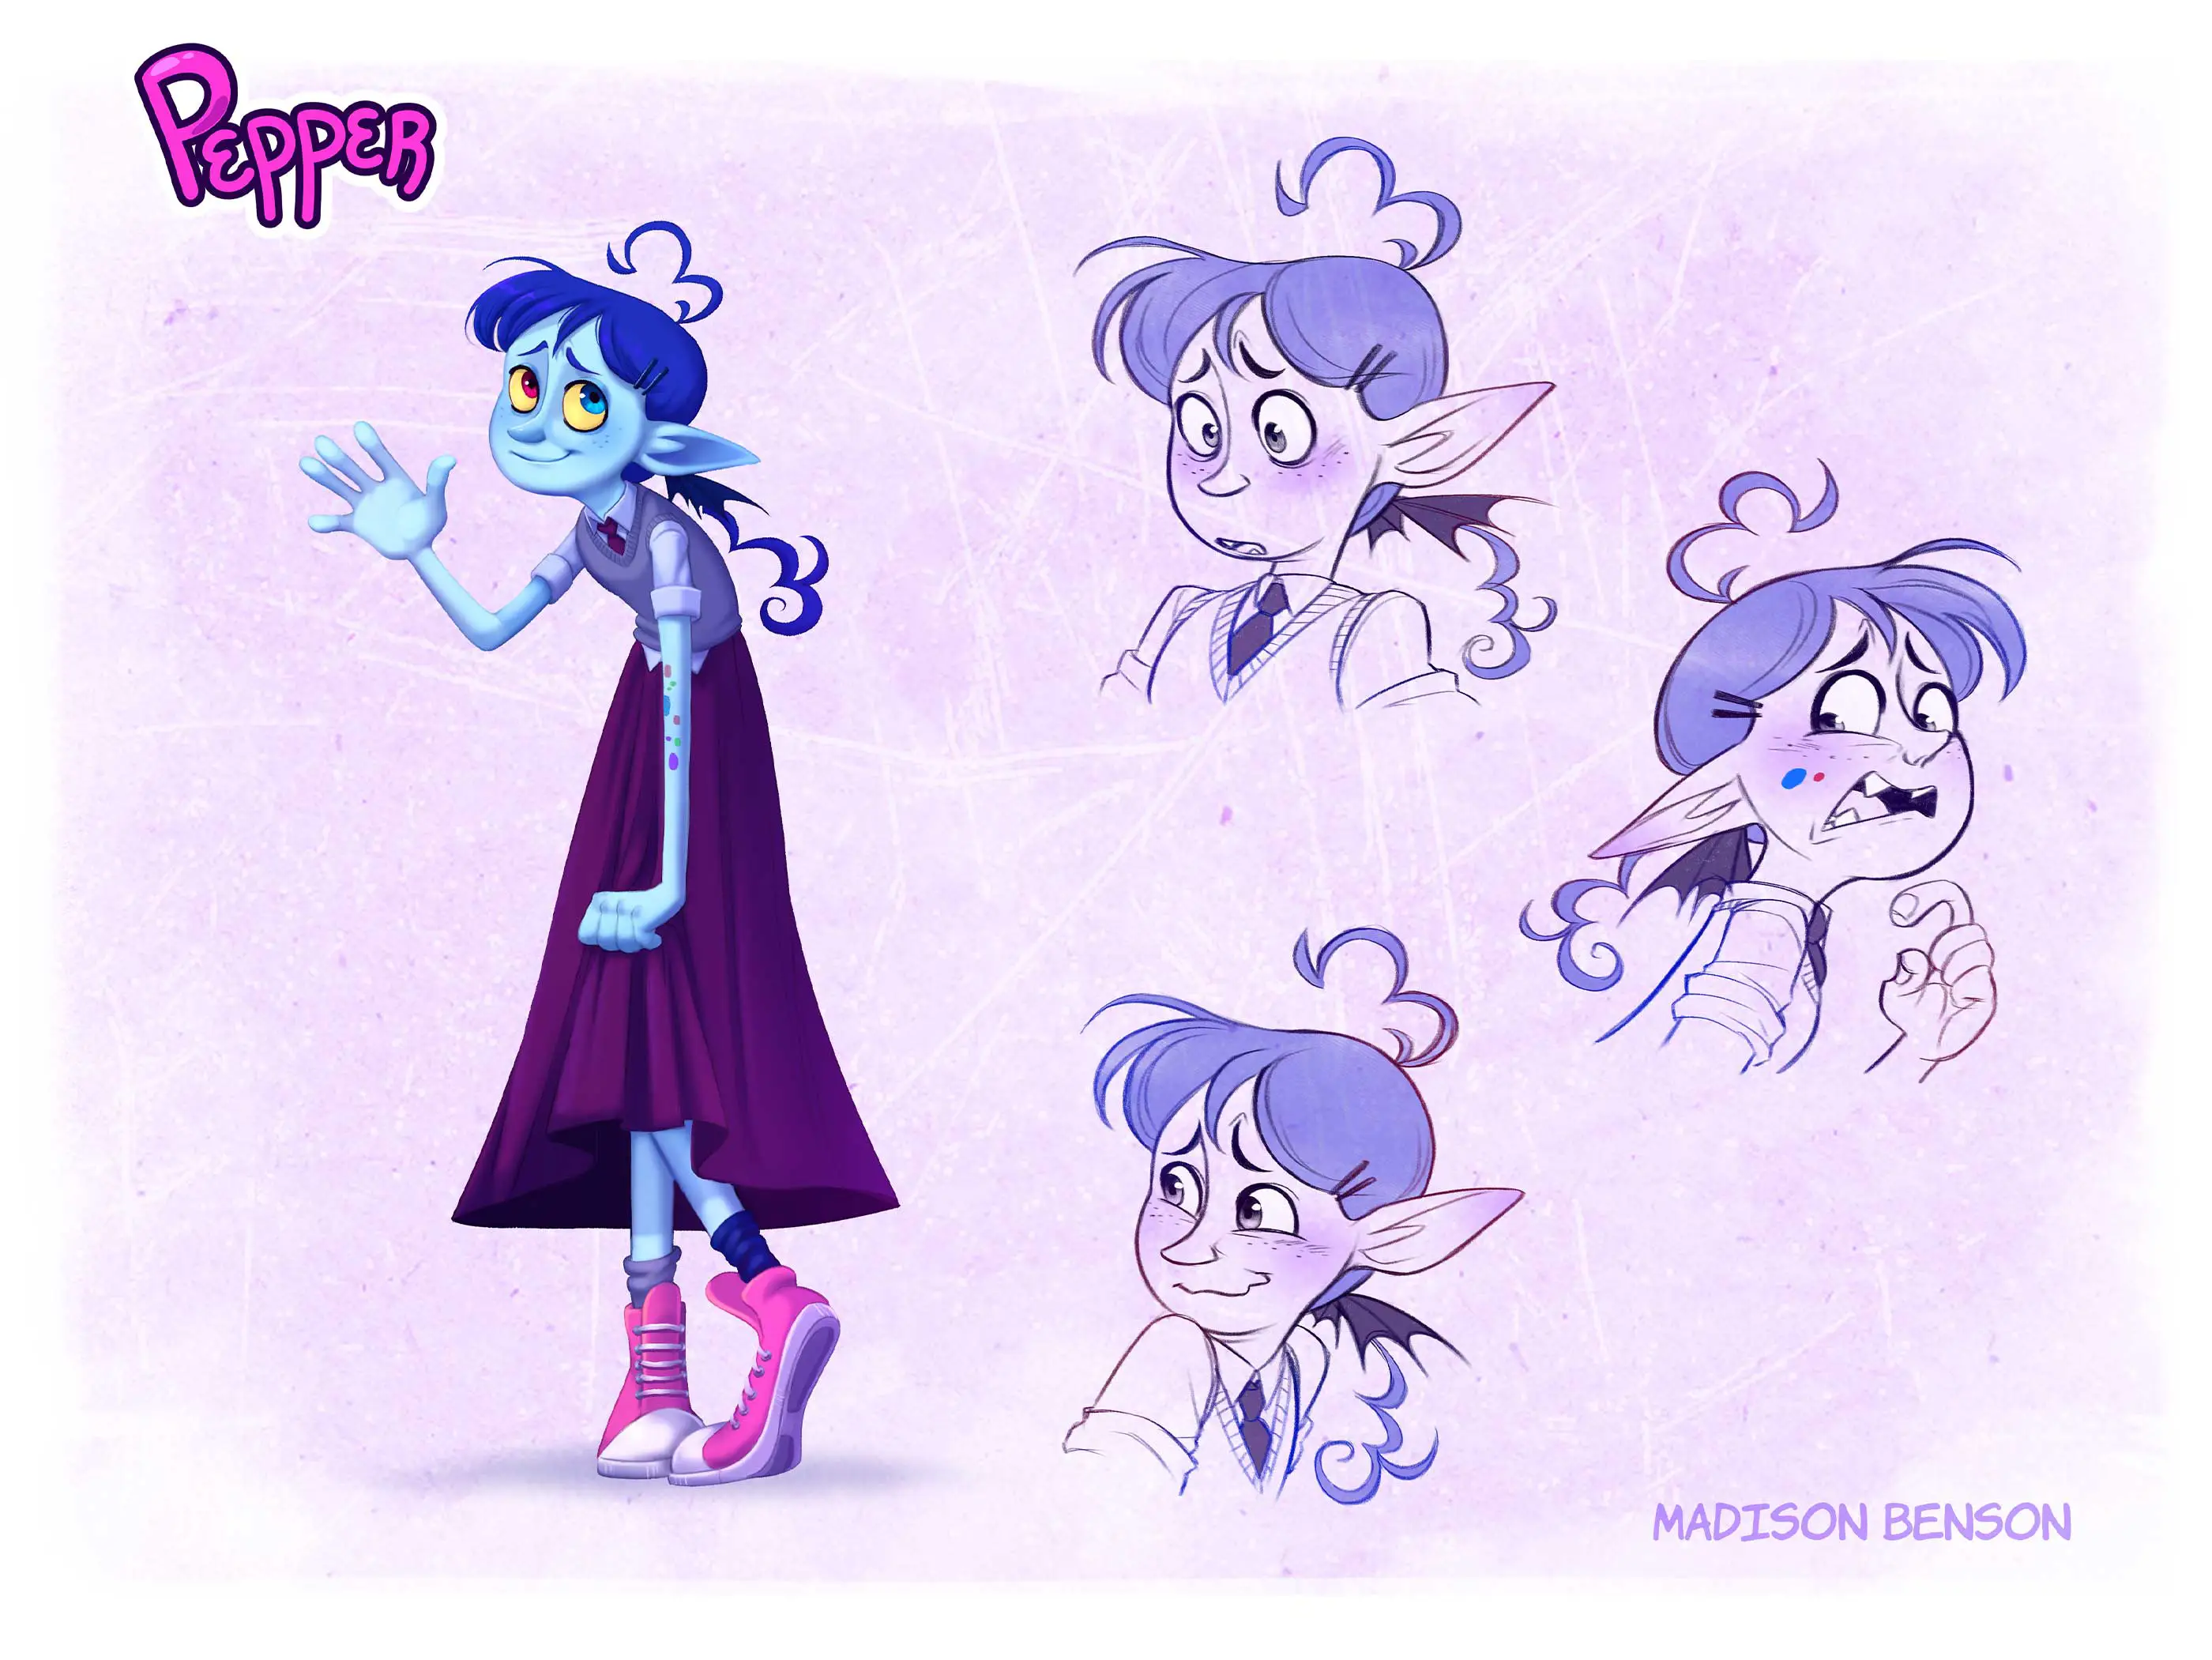 A drawing with multiple expressions of a blue elf-like girl.